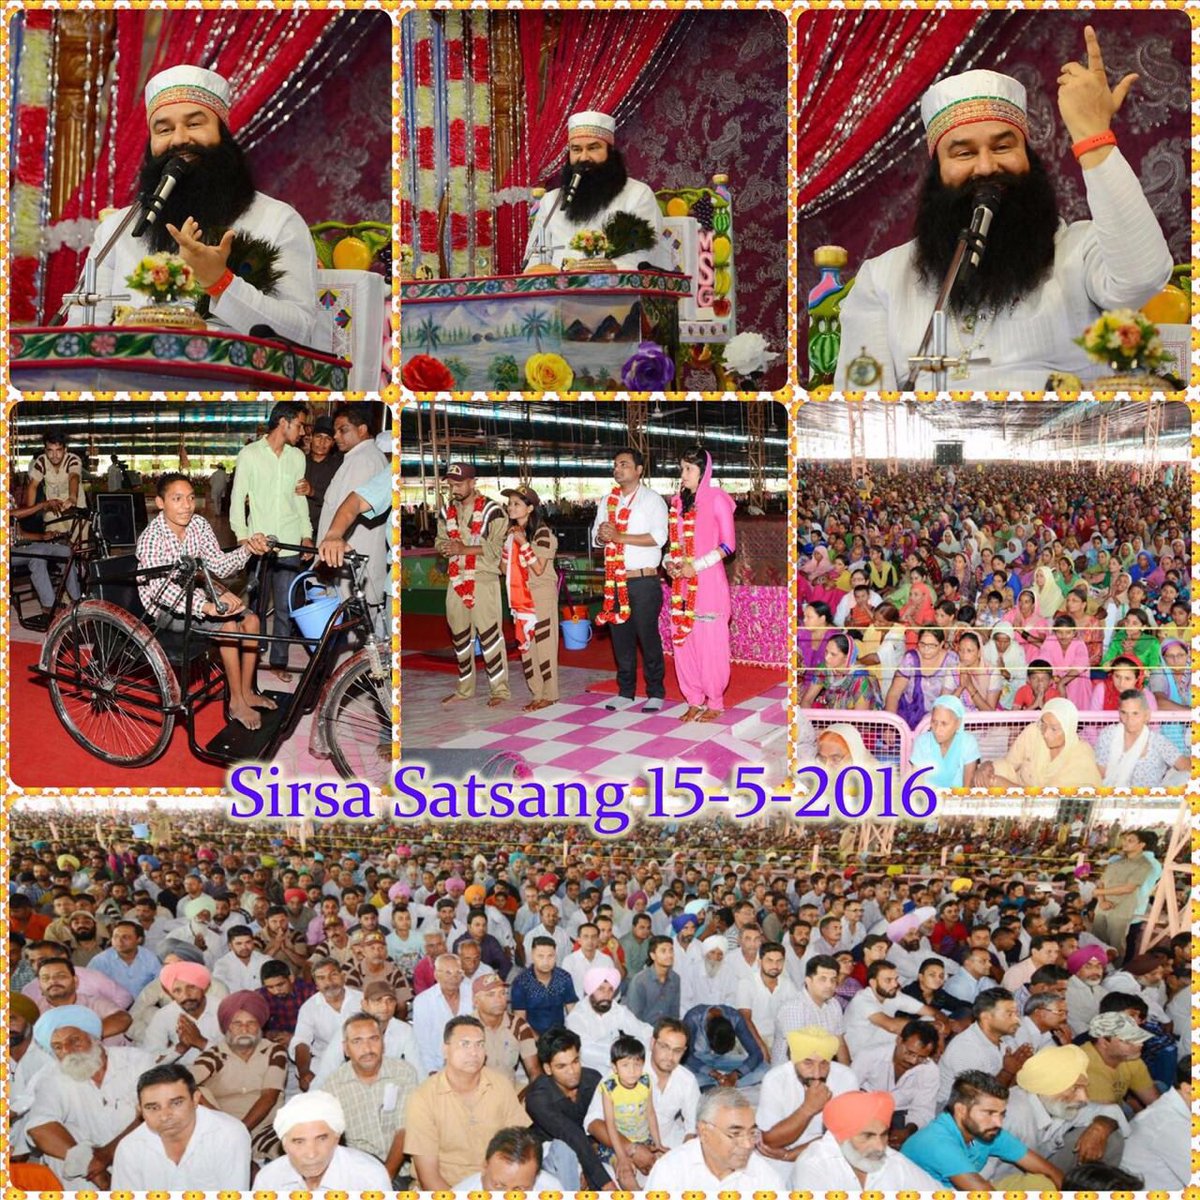 #MSGpreaches  On Sunday ,10230 ppl learnt Method of Meditation. Home Keys & Tricycles given to needy.